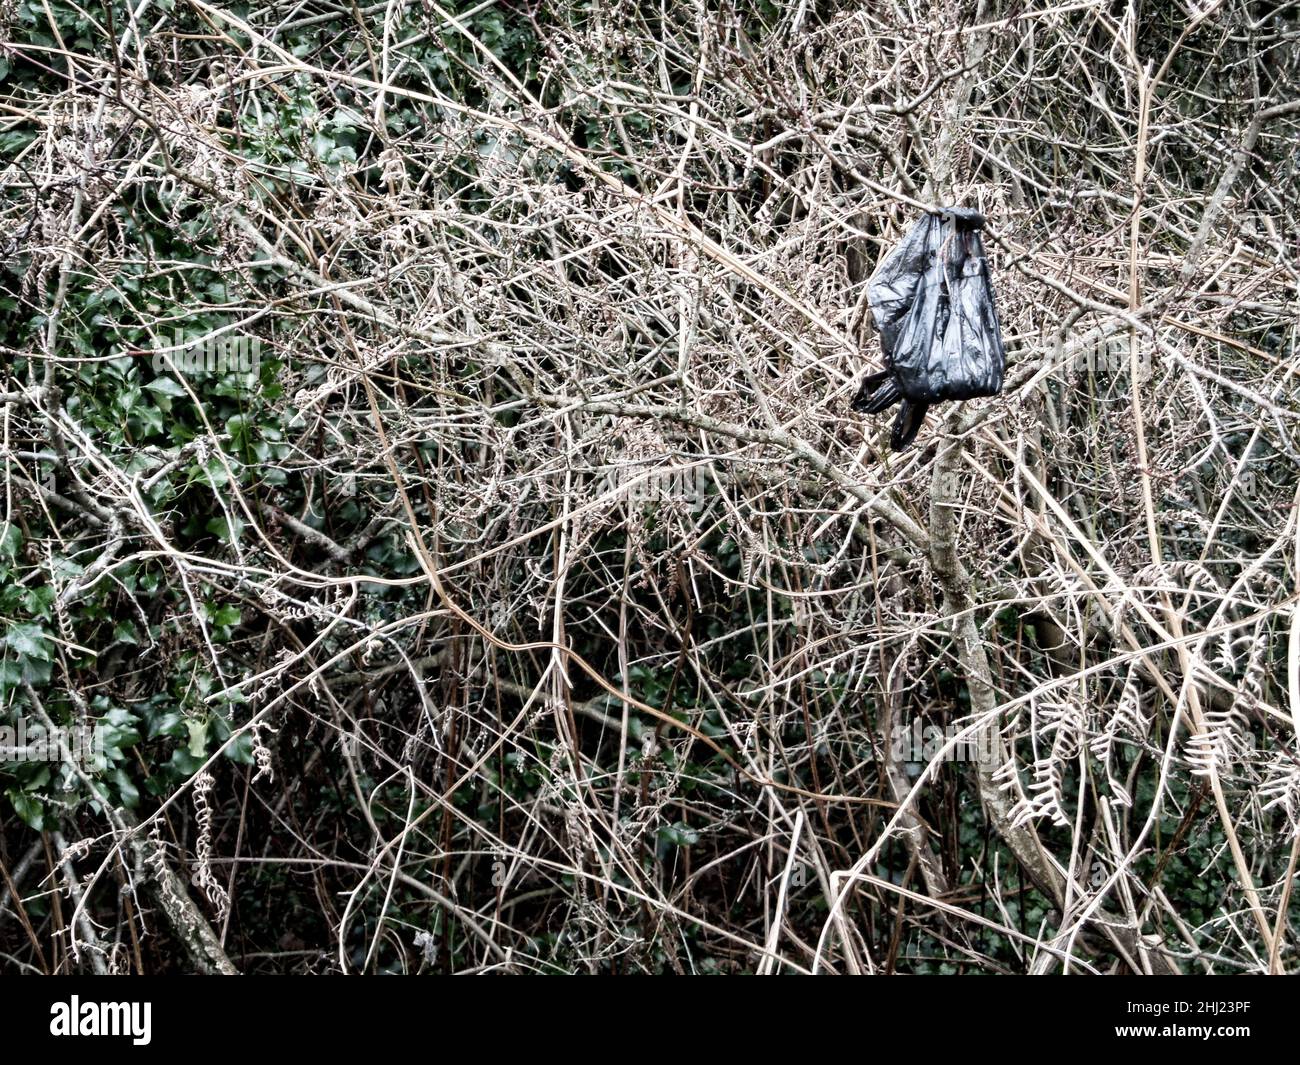 Found still-life of inconsiderate dog owners hanging poo bags from Hedgerow plants Stock Photo